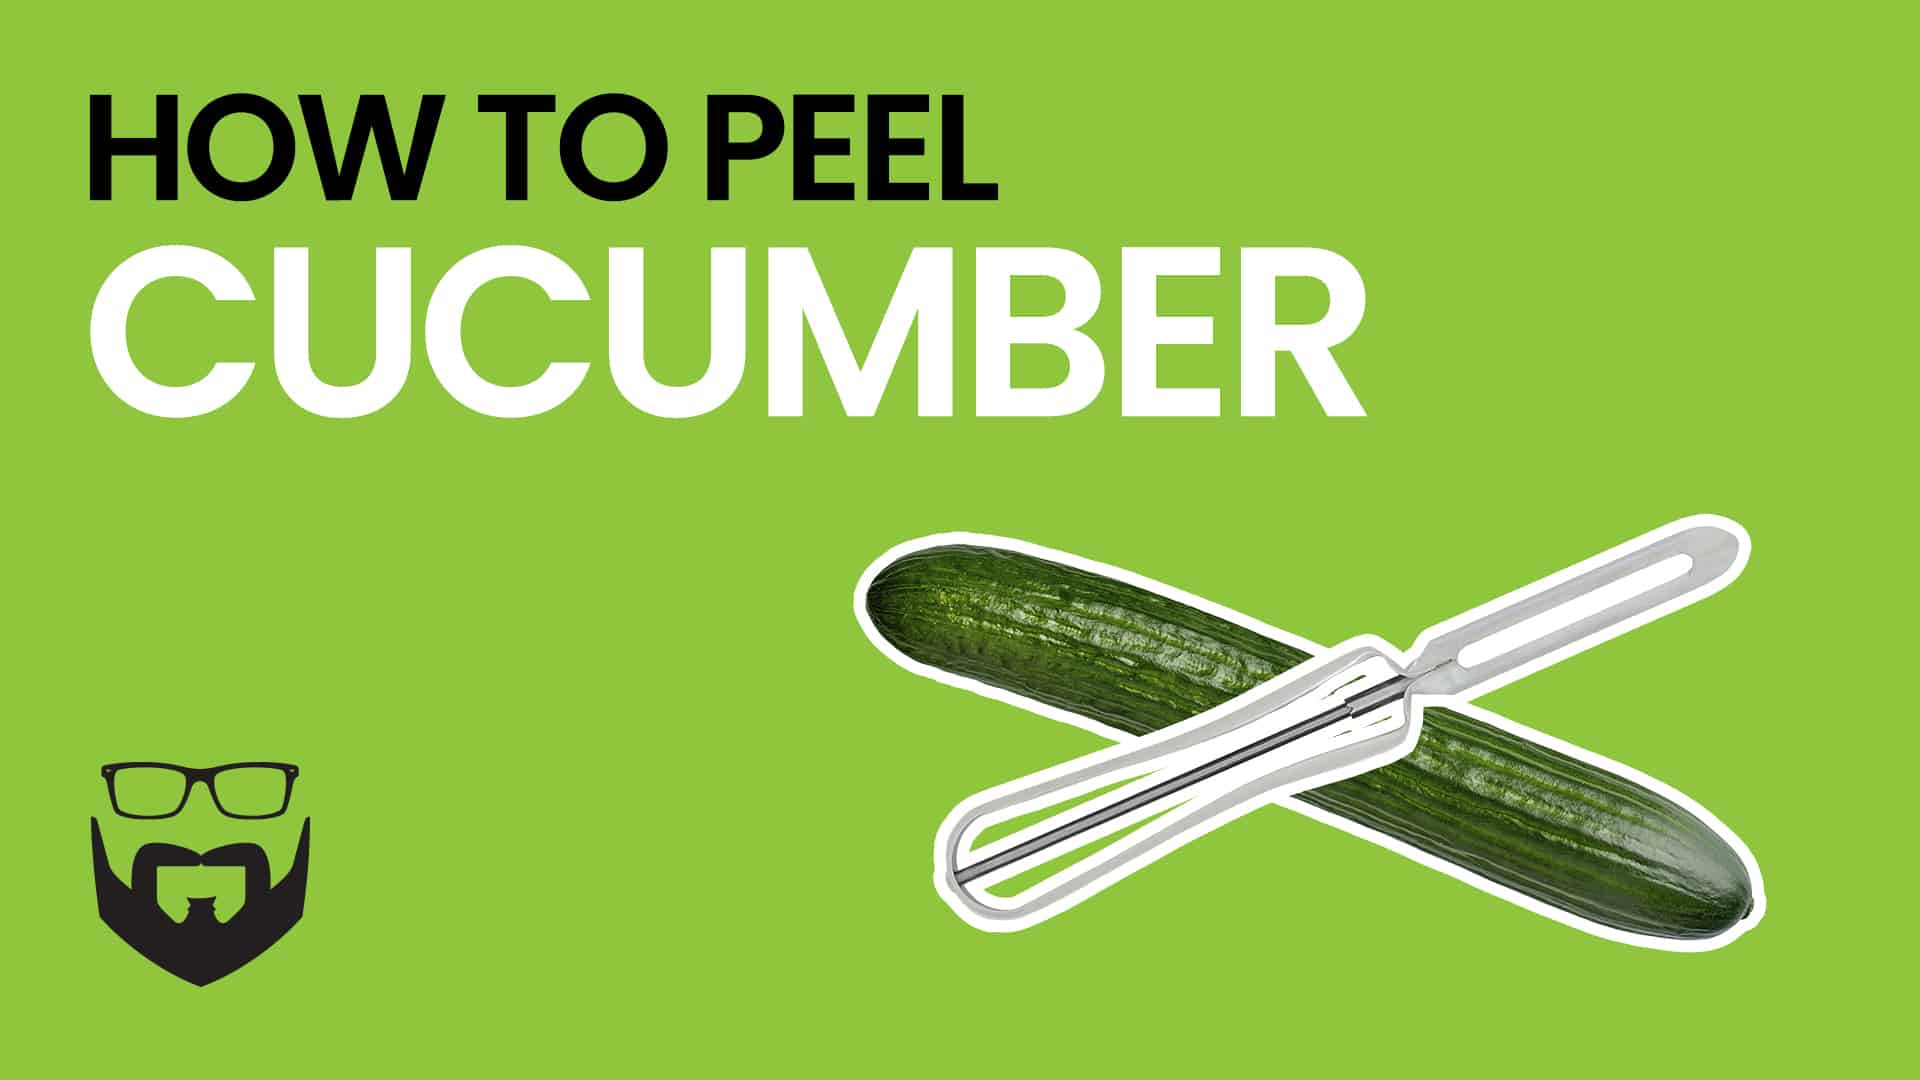 How to Peel Cucumber Video - Green